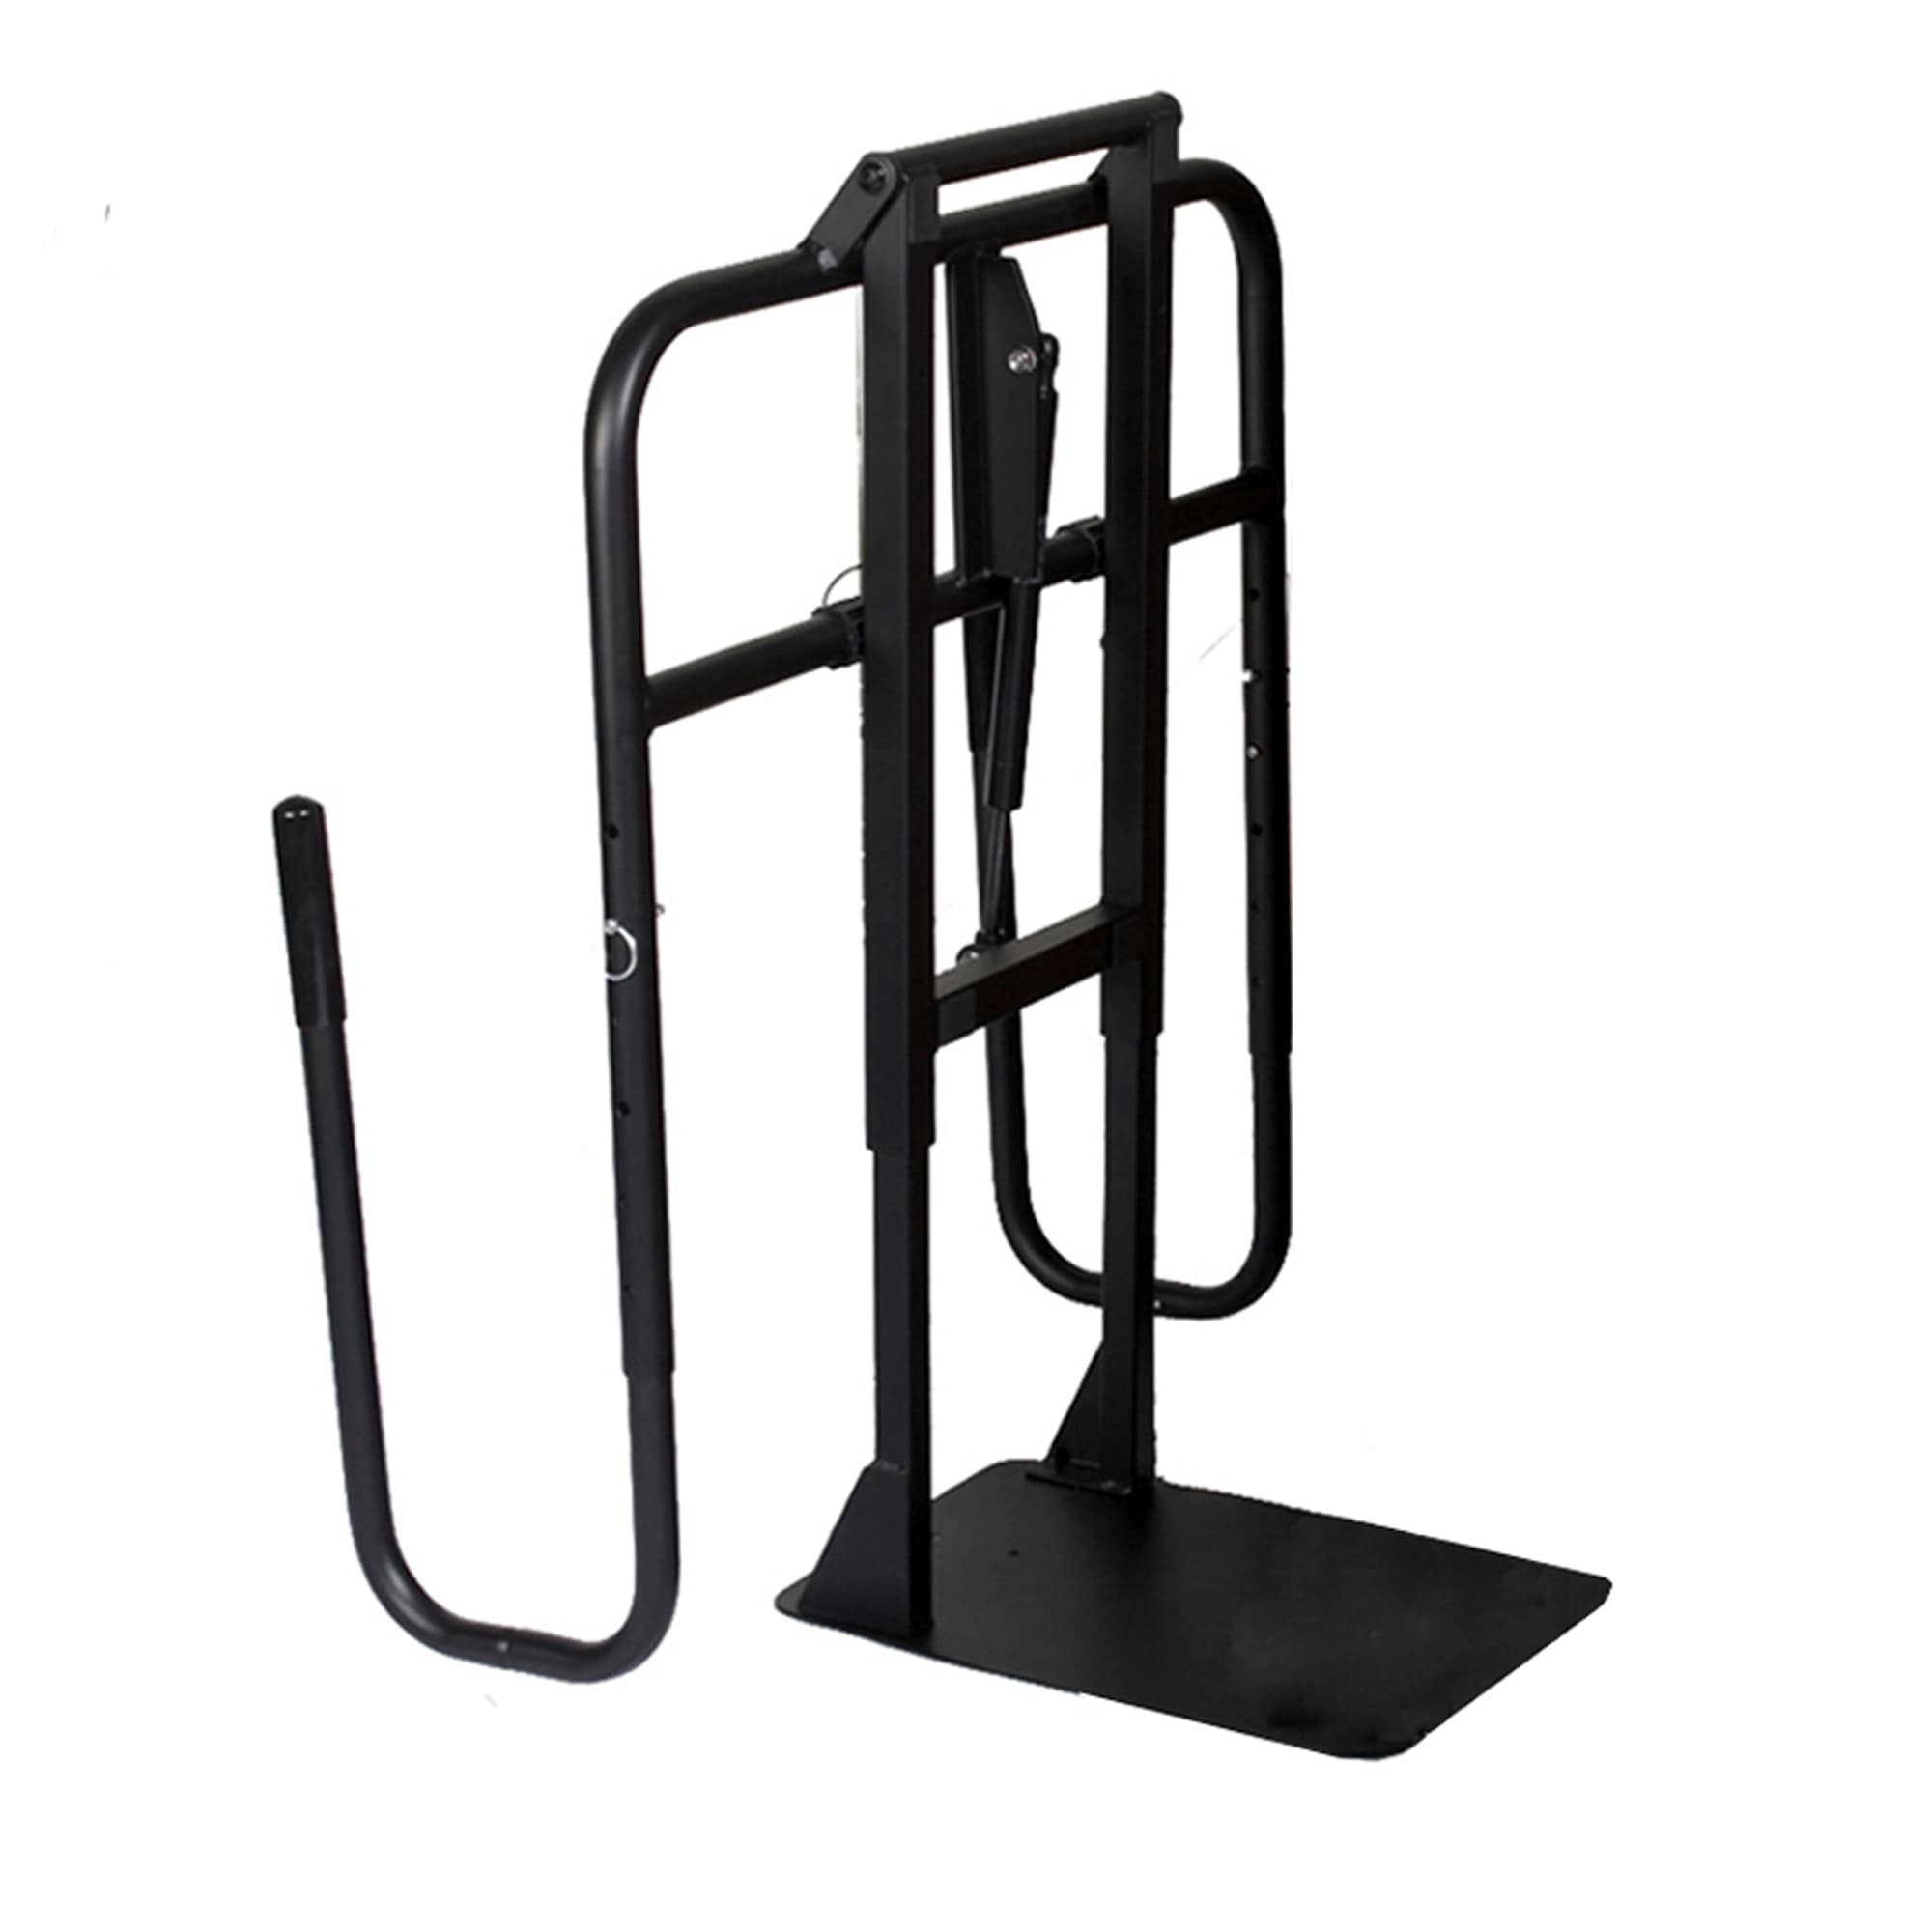 Lift and Caddy Compare $188.88 Today $186.99 Save 1%